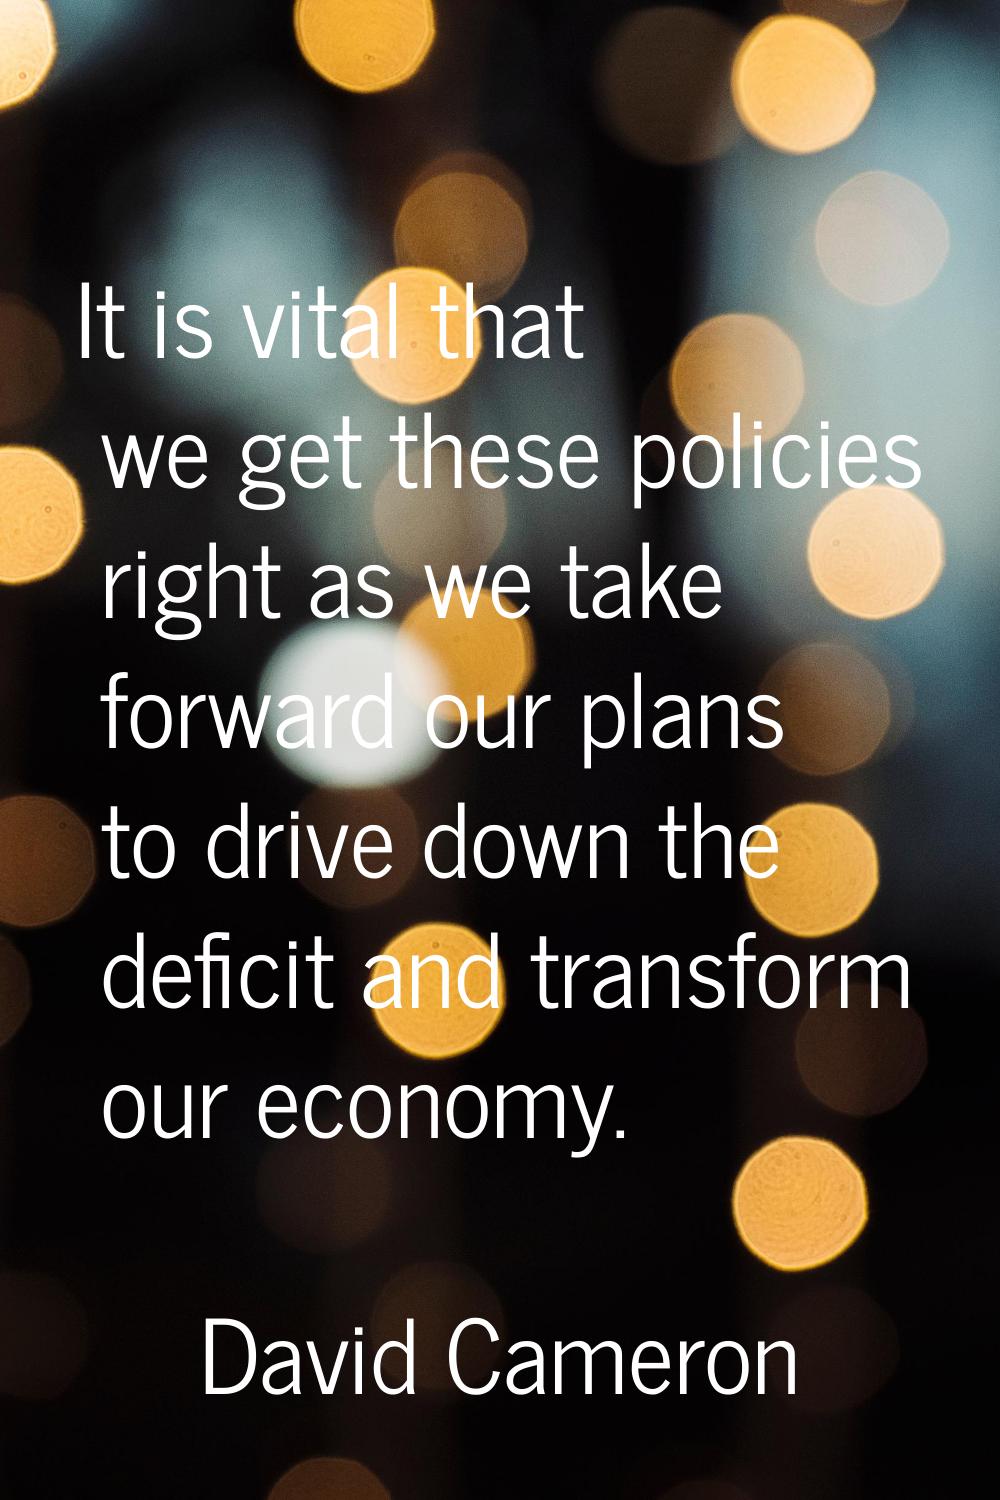 It is vital that we get these policies right as we take forward our plans to drive down the deficit